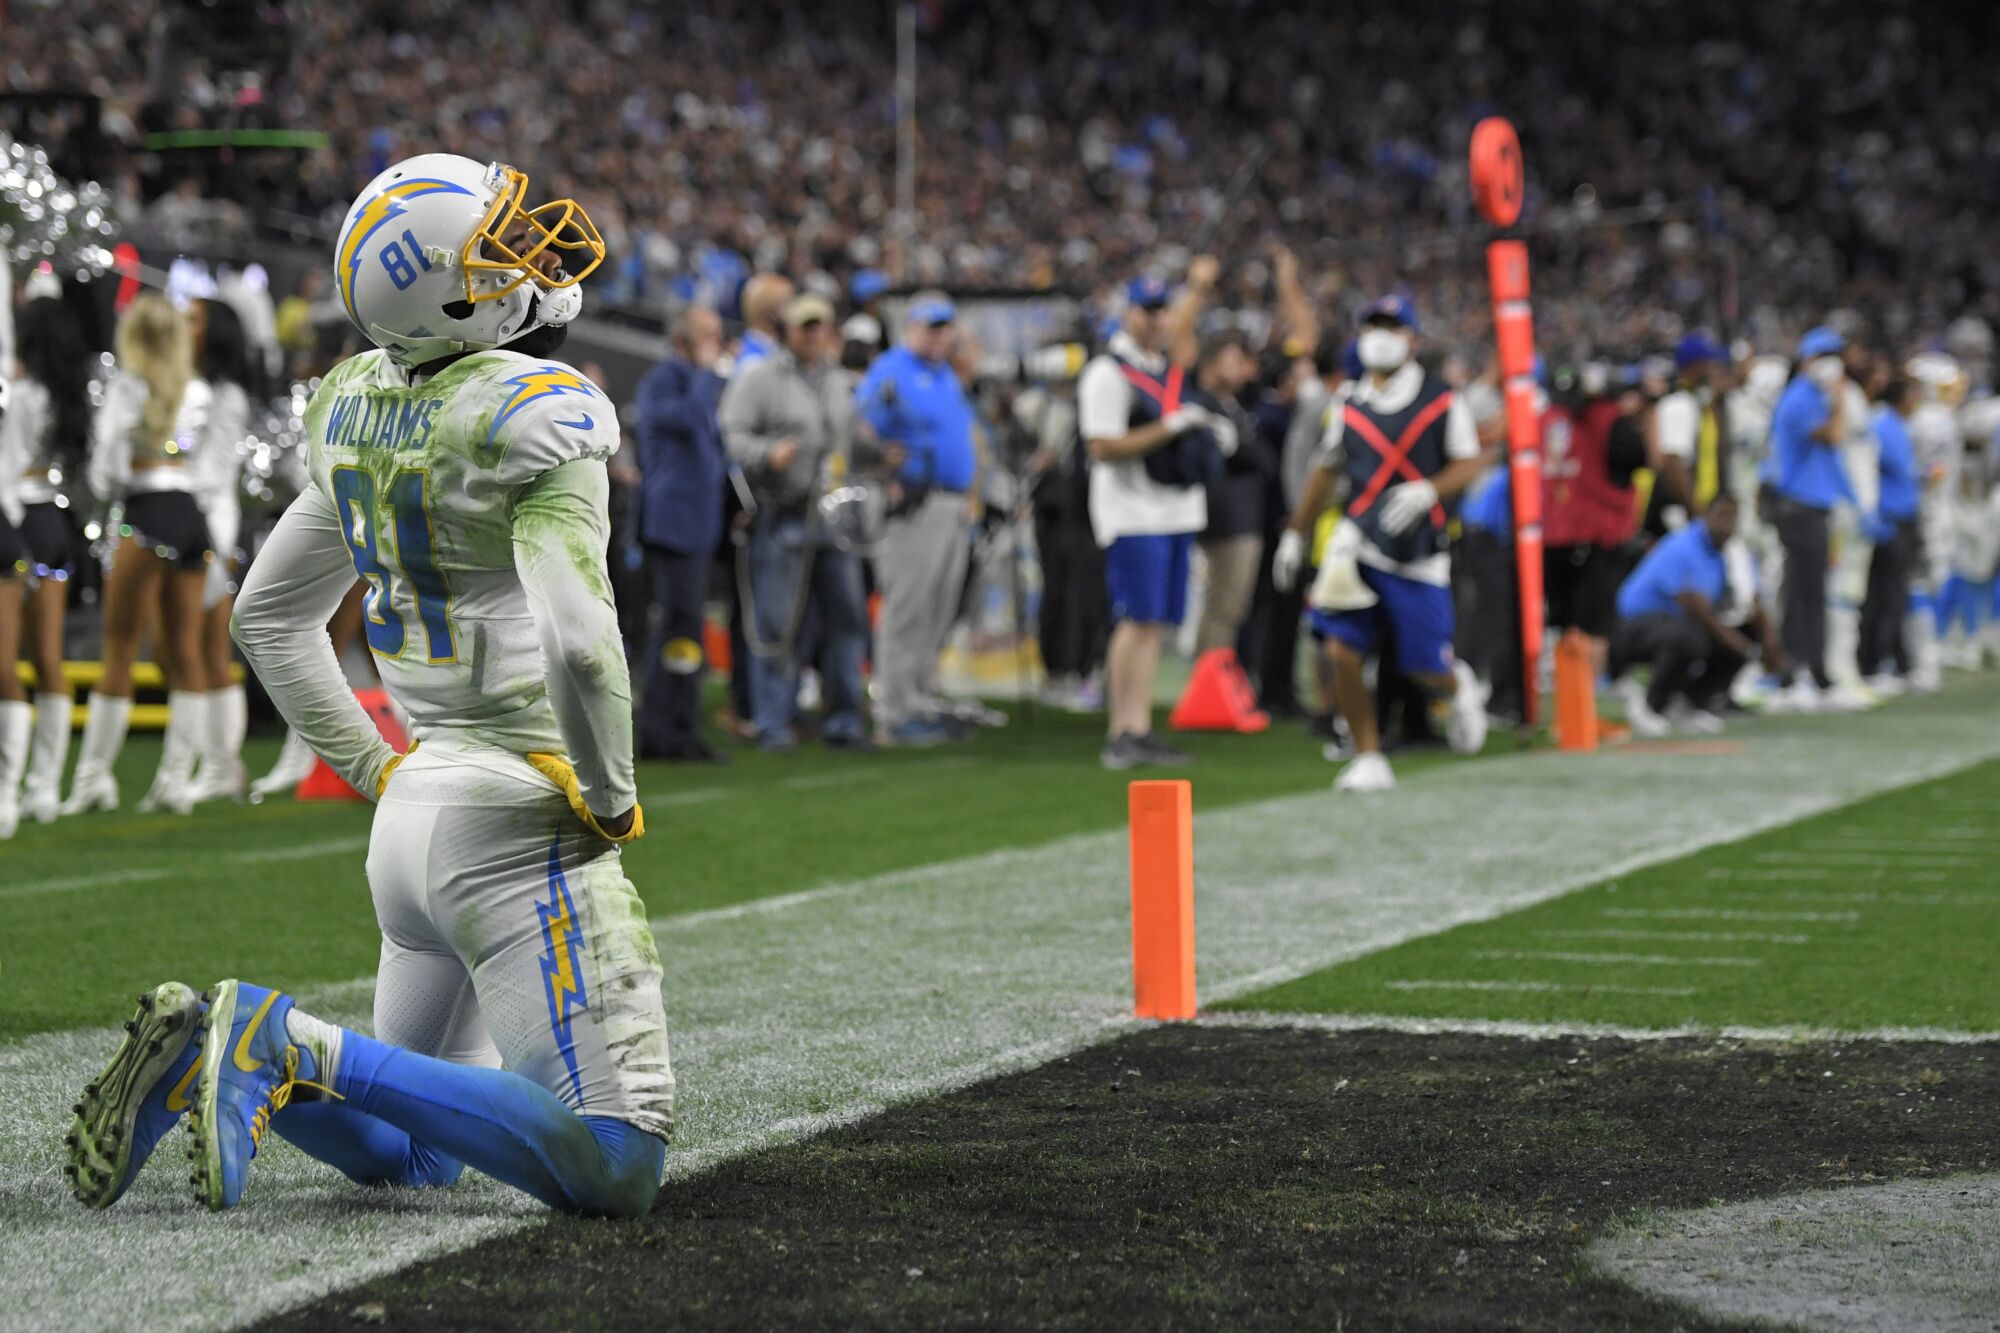 Chargers wide receiver Mike Williams reacts after missing an end-zone pass in overtime.